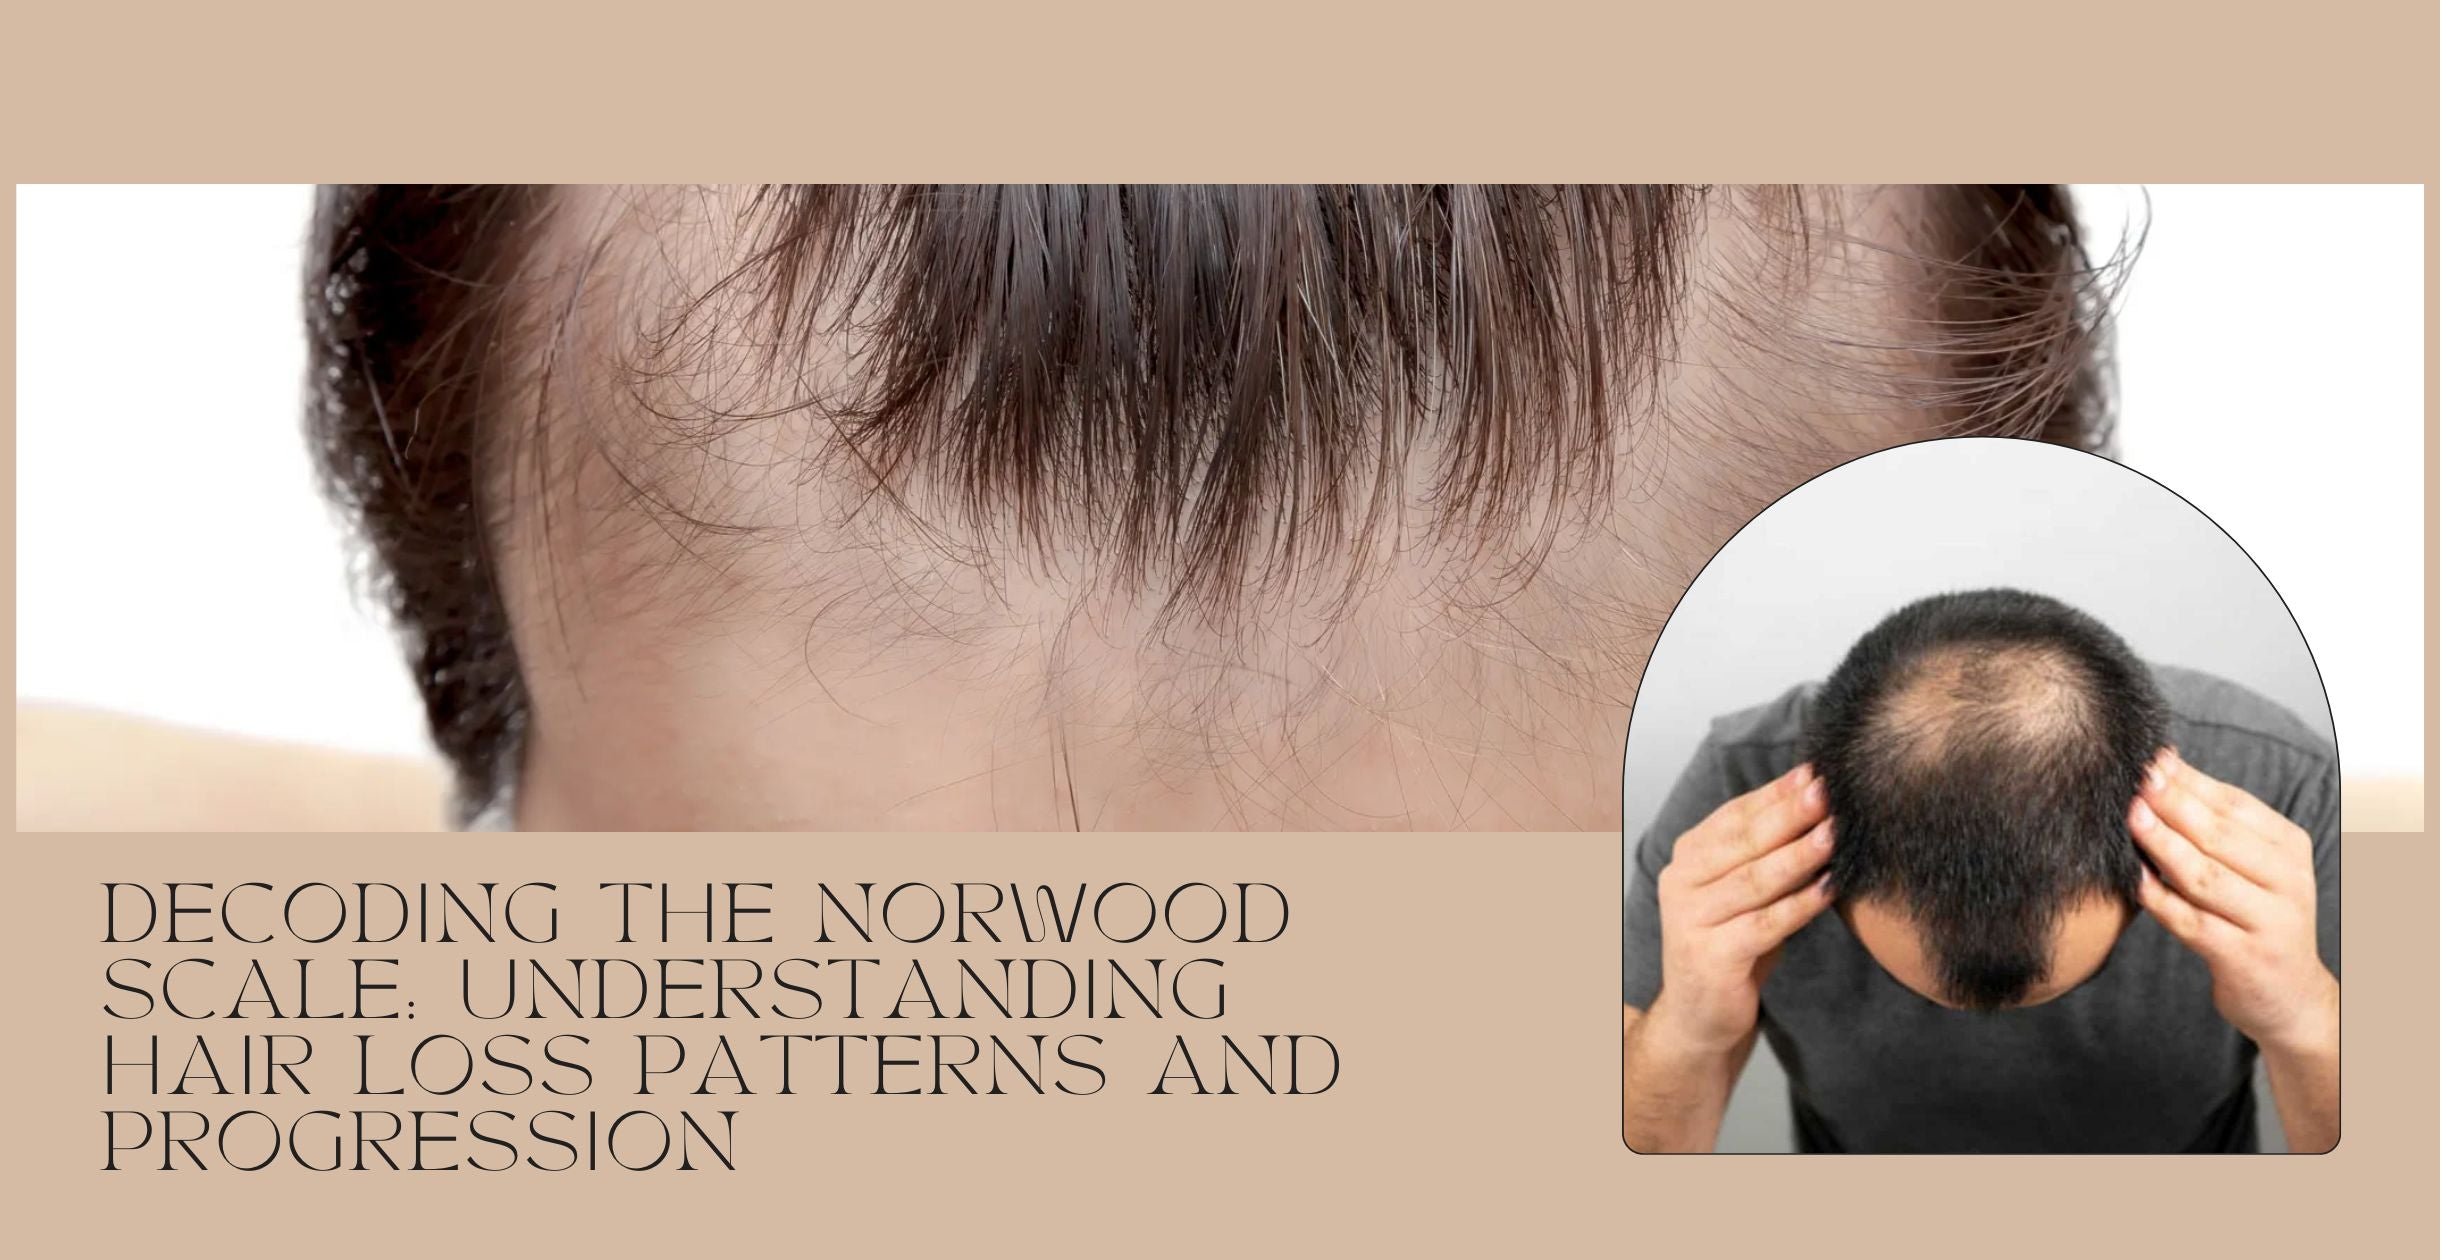 Decoding the Norwood Scale: Understanding Hair Loss Patterns and Progression